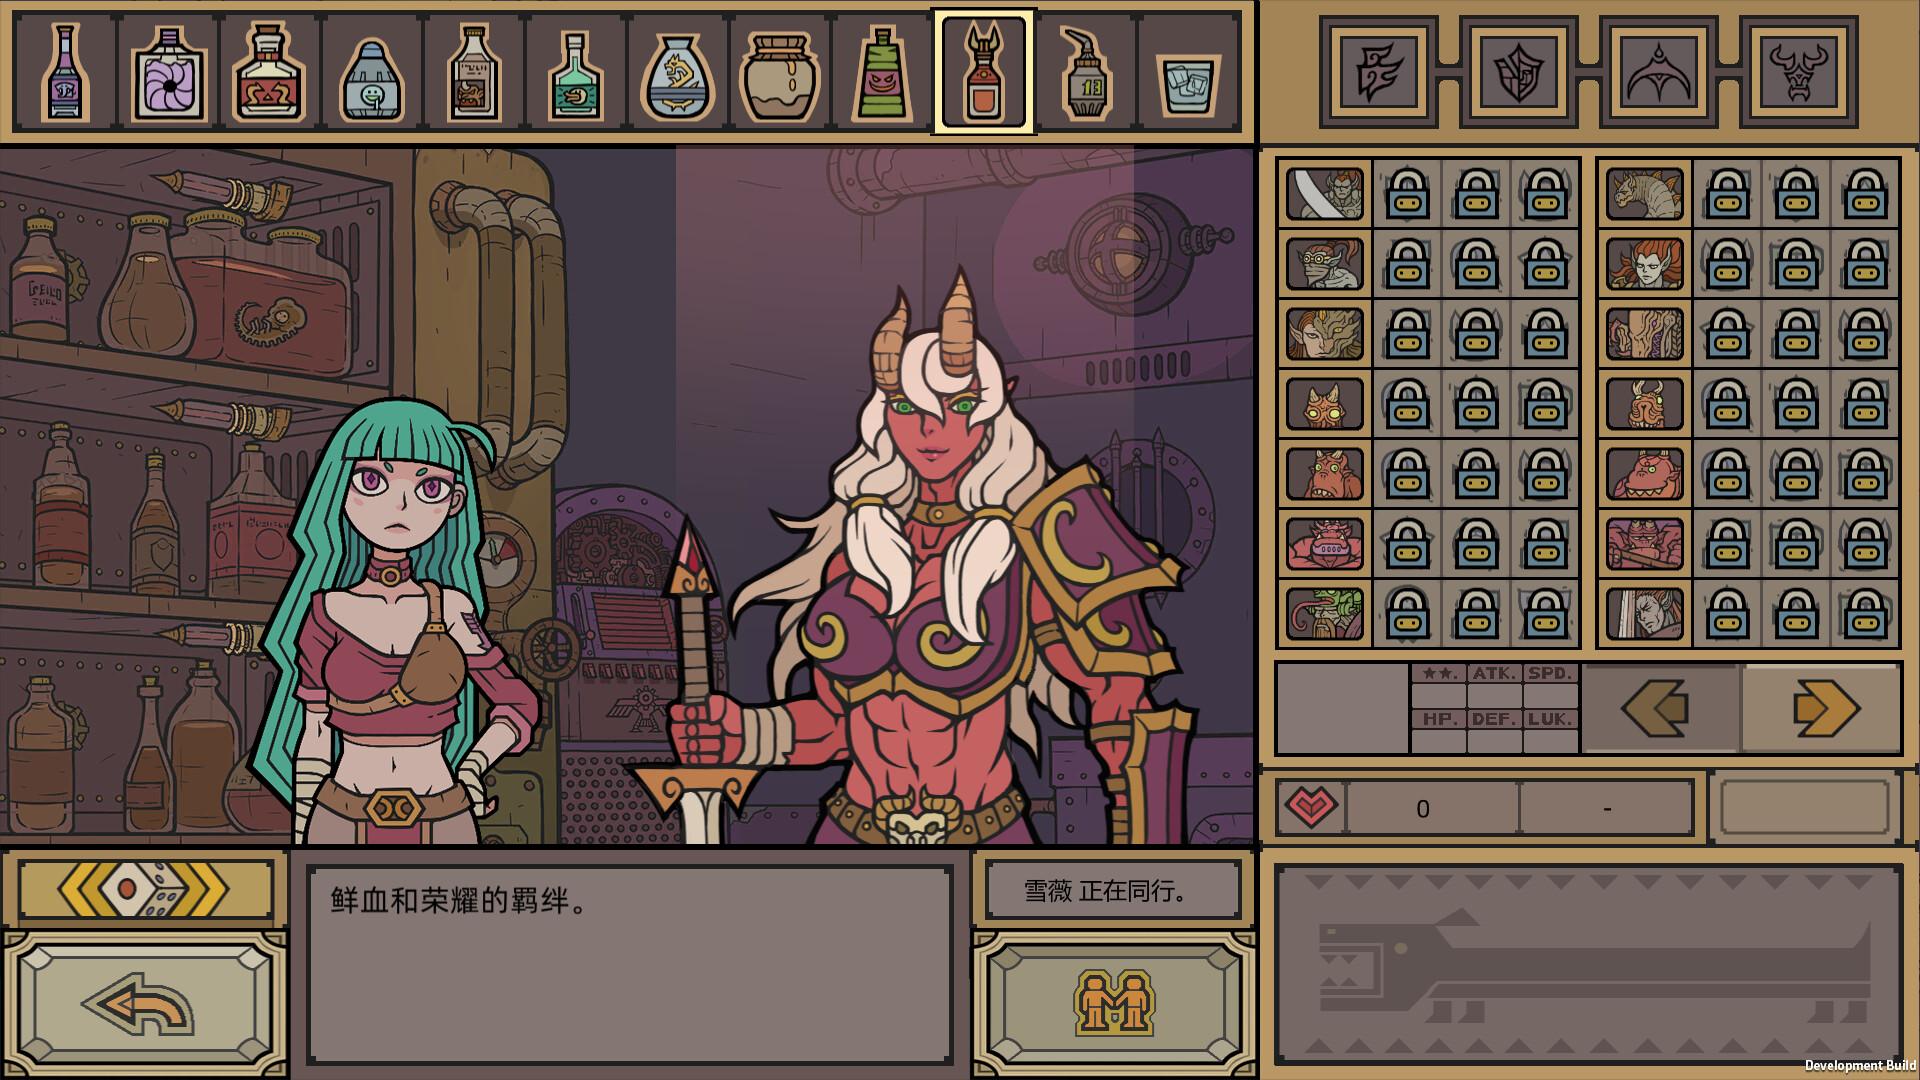 Screenshot №7 from game LEGIONCRAFT